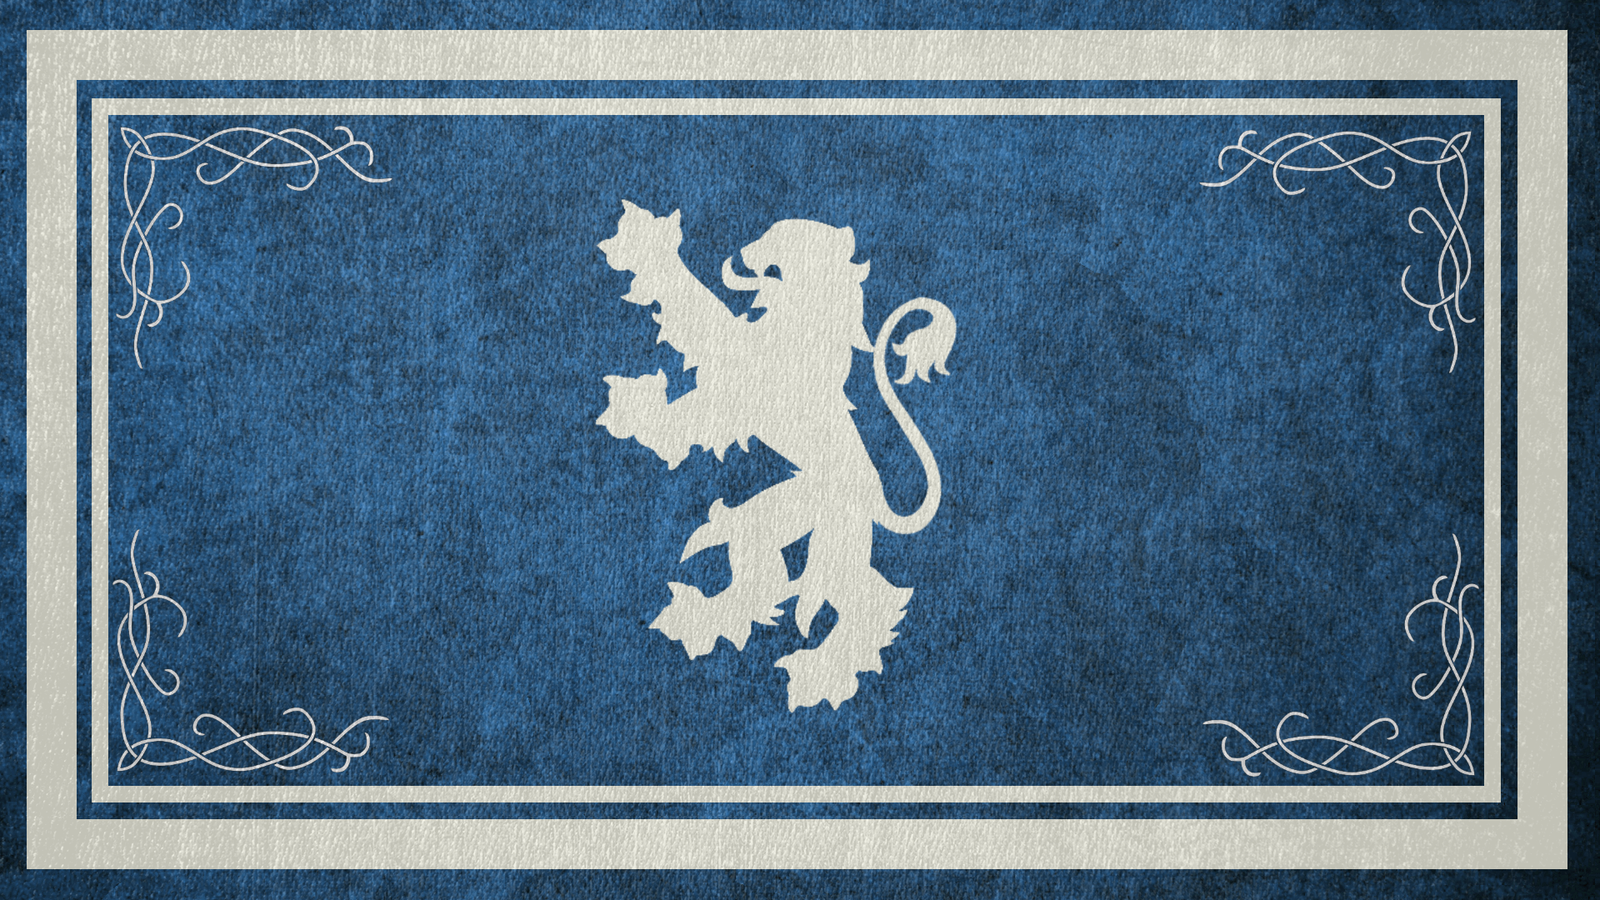 the_elder_scrolls__flag_of_the_daggerfall_covenant_by_okiir-d6gbdni.png